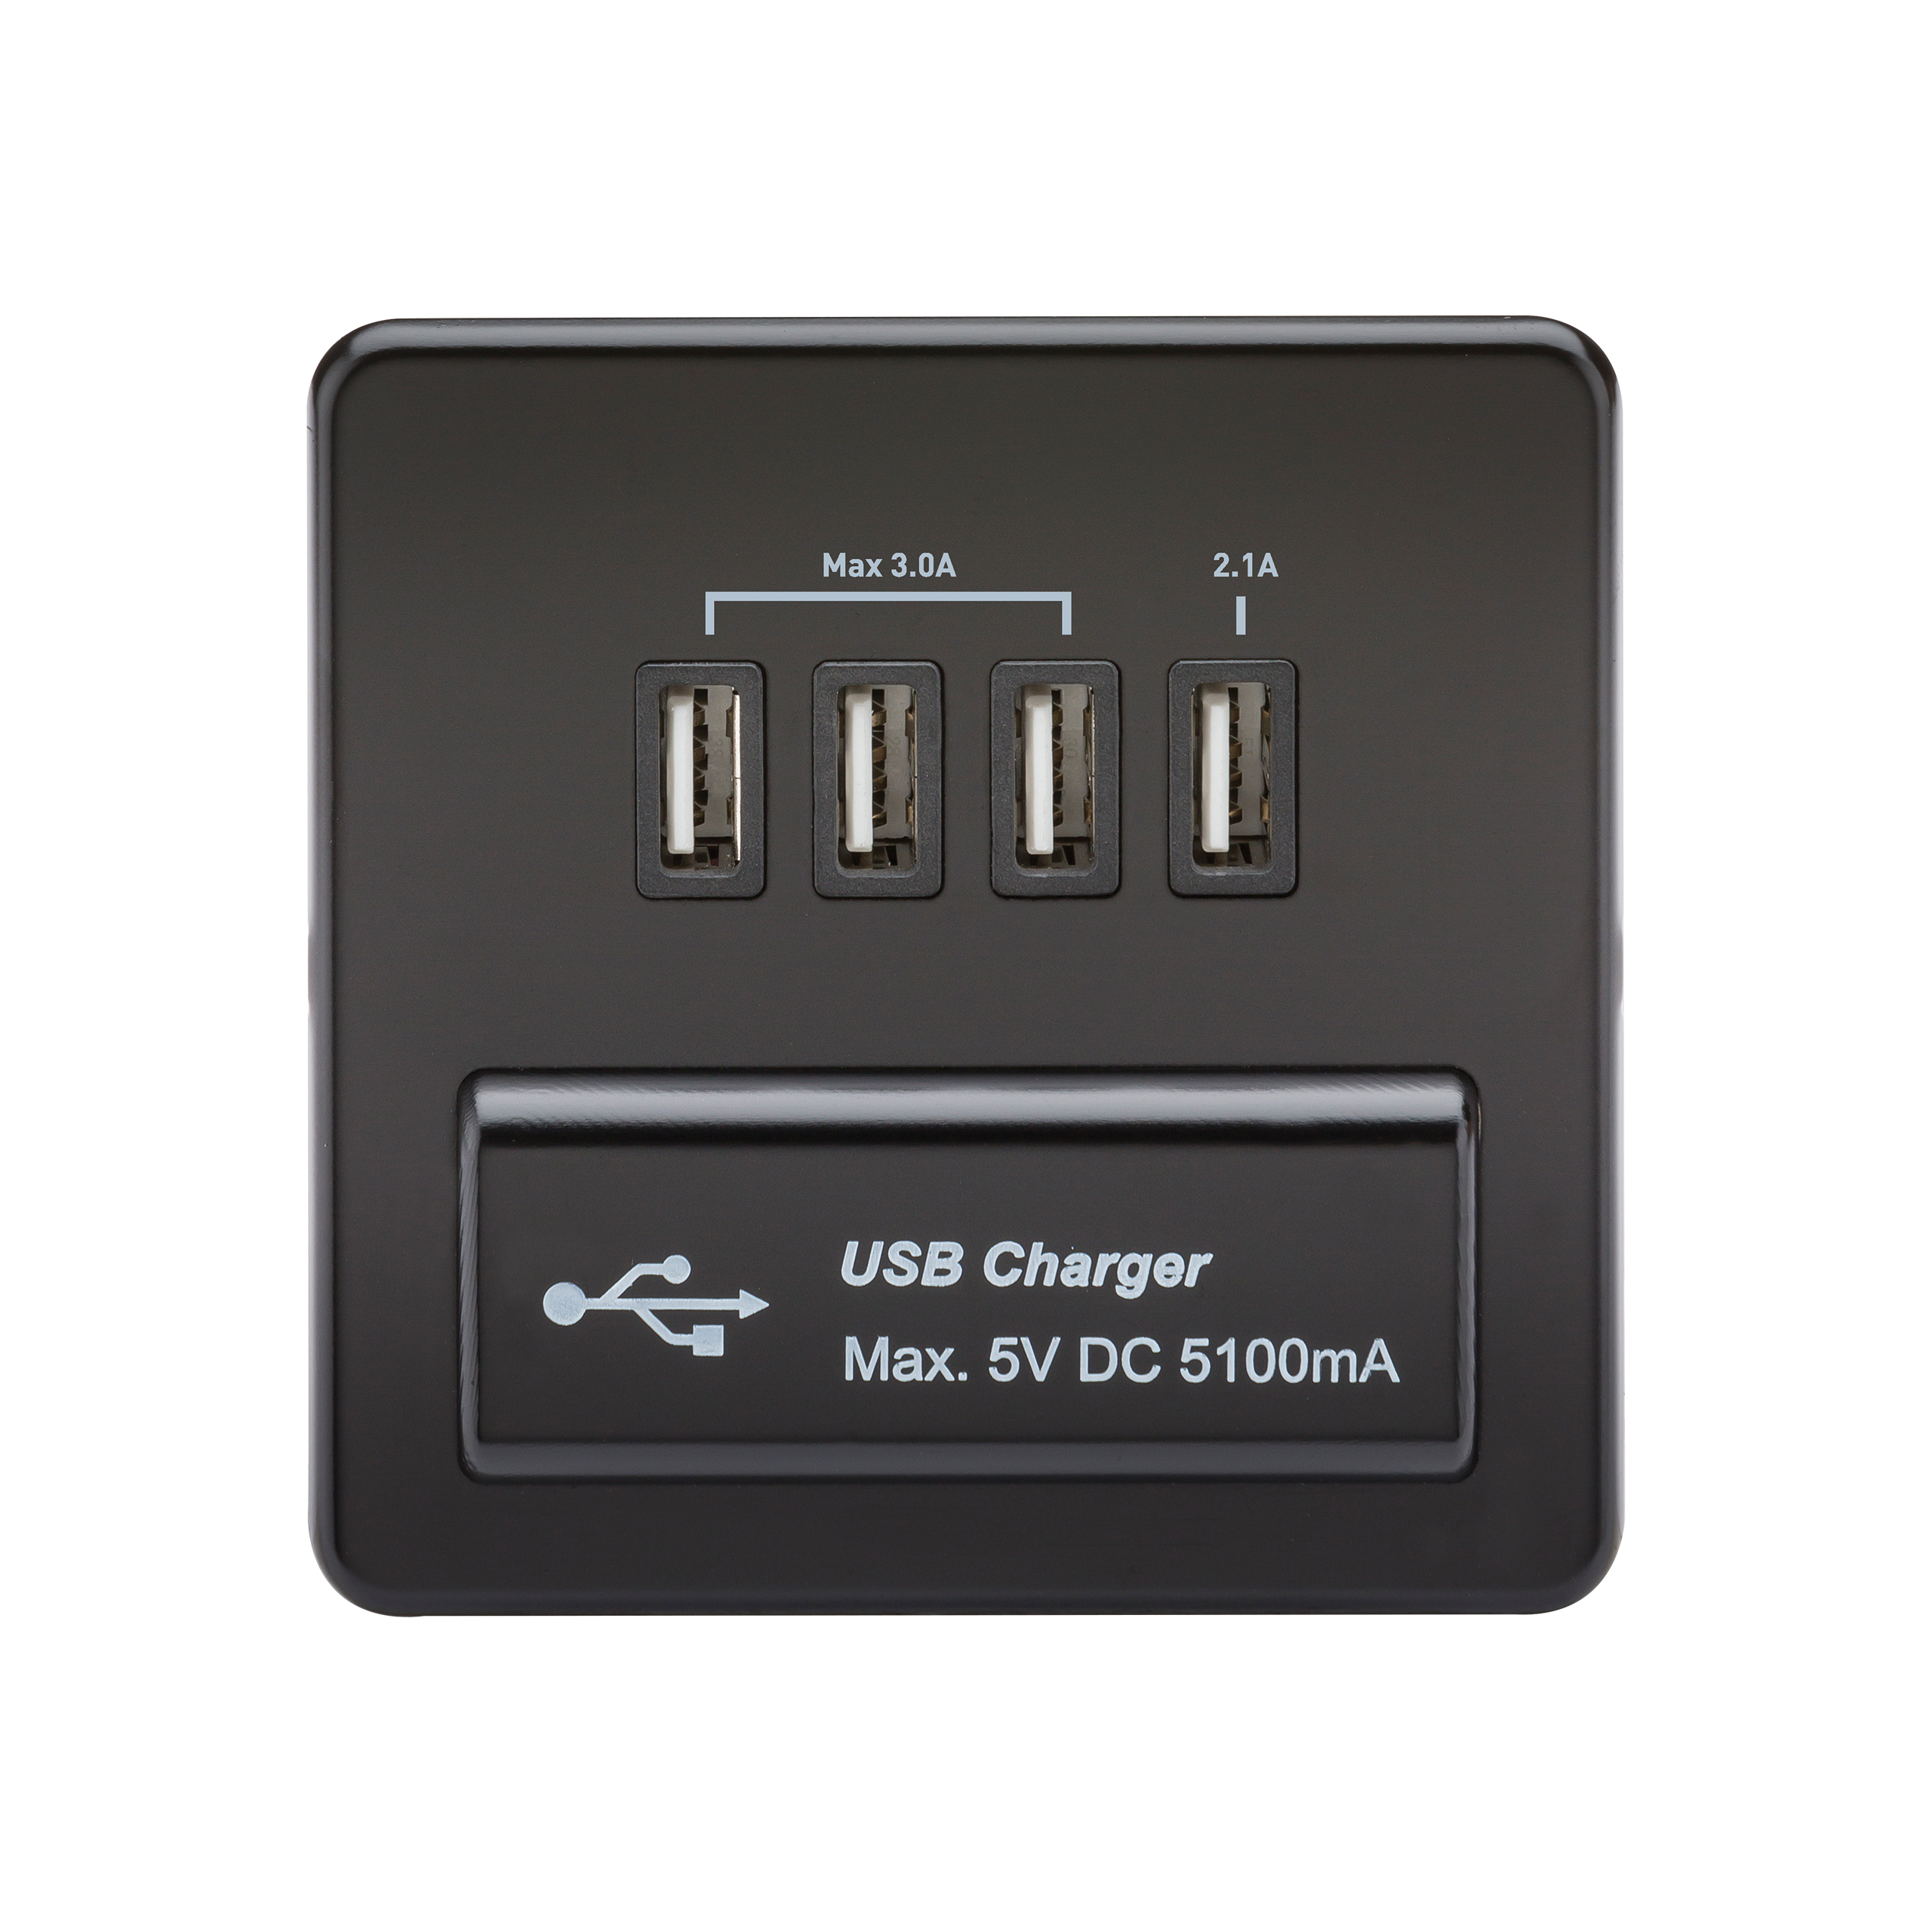 Screwless Quad USB Charger Output (5.1A) - Matte Black with Insert - Picture 1 of 1